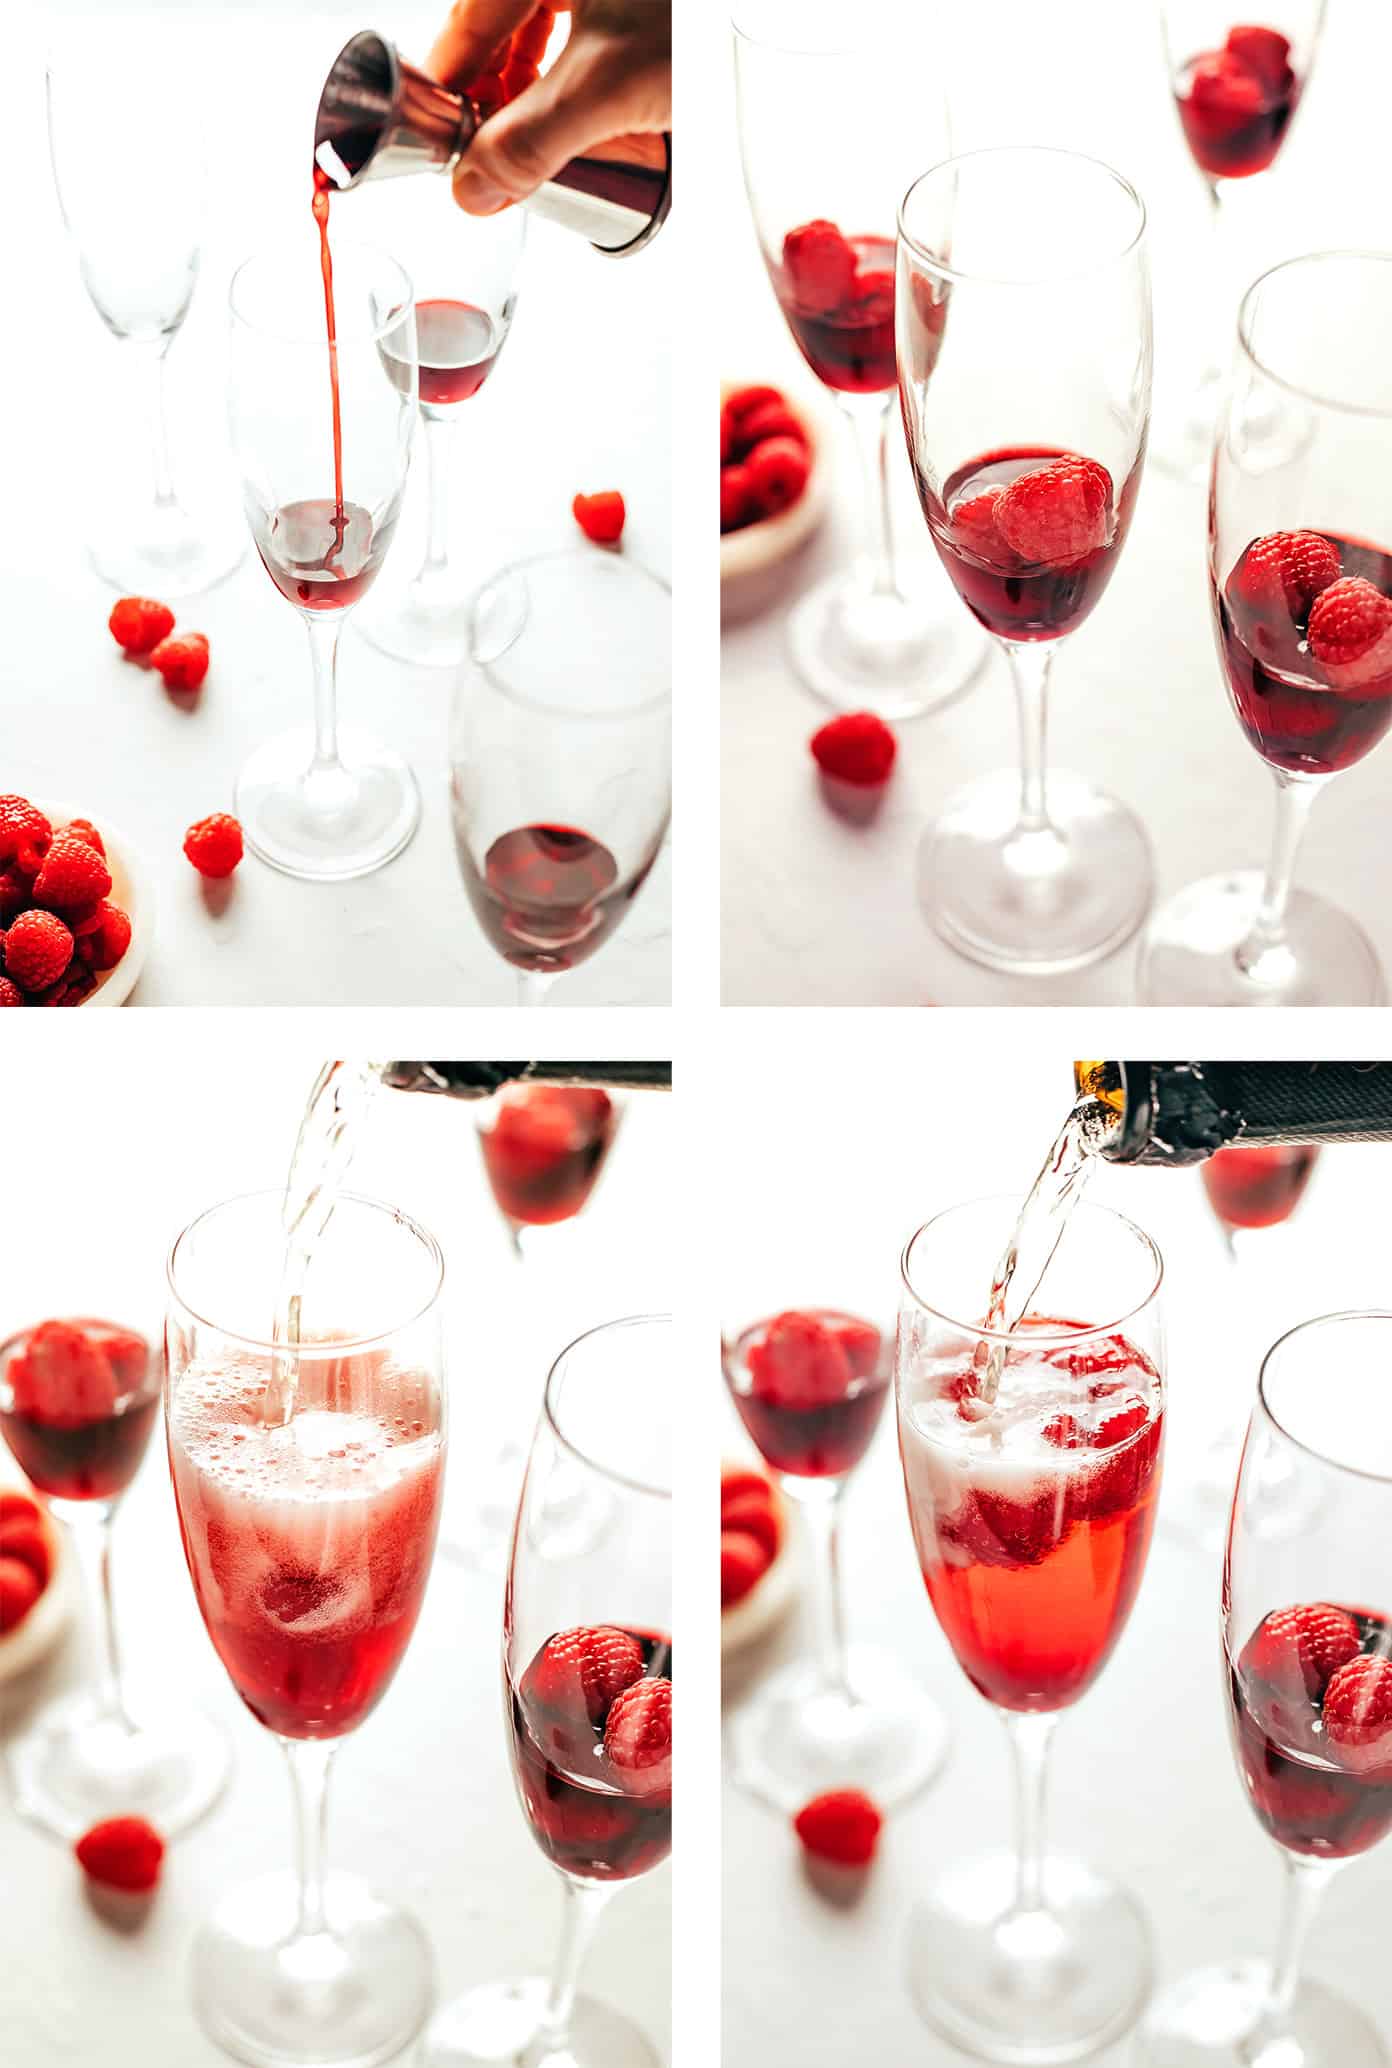 Step by step photos showing how to make a kir royale cocktail